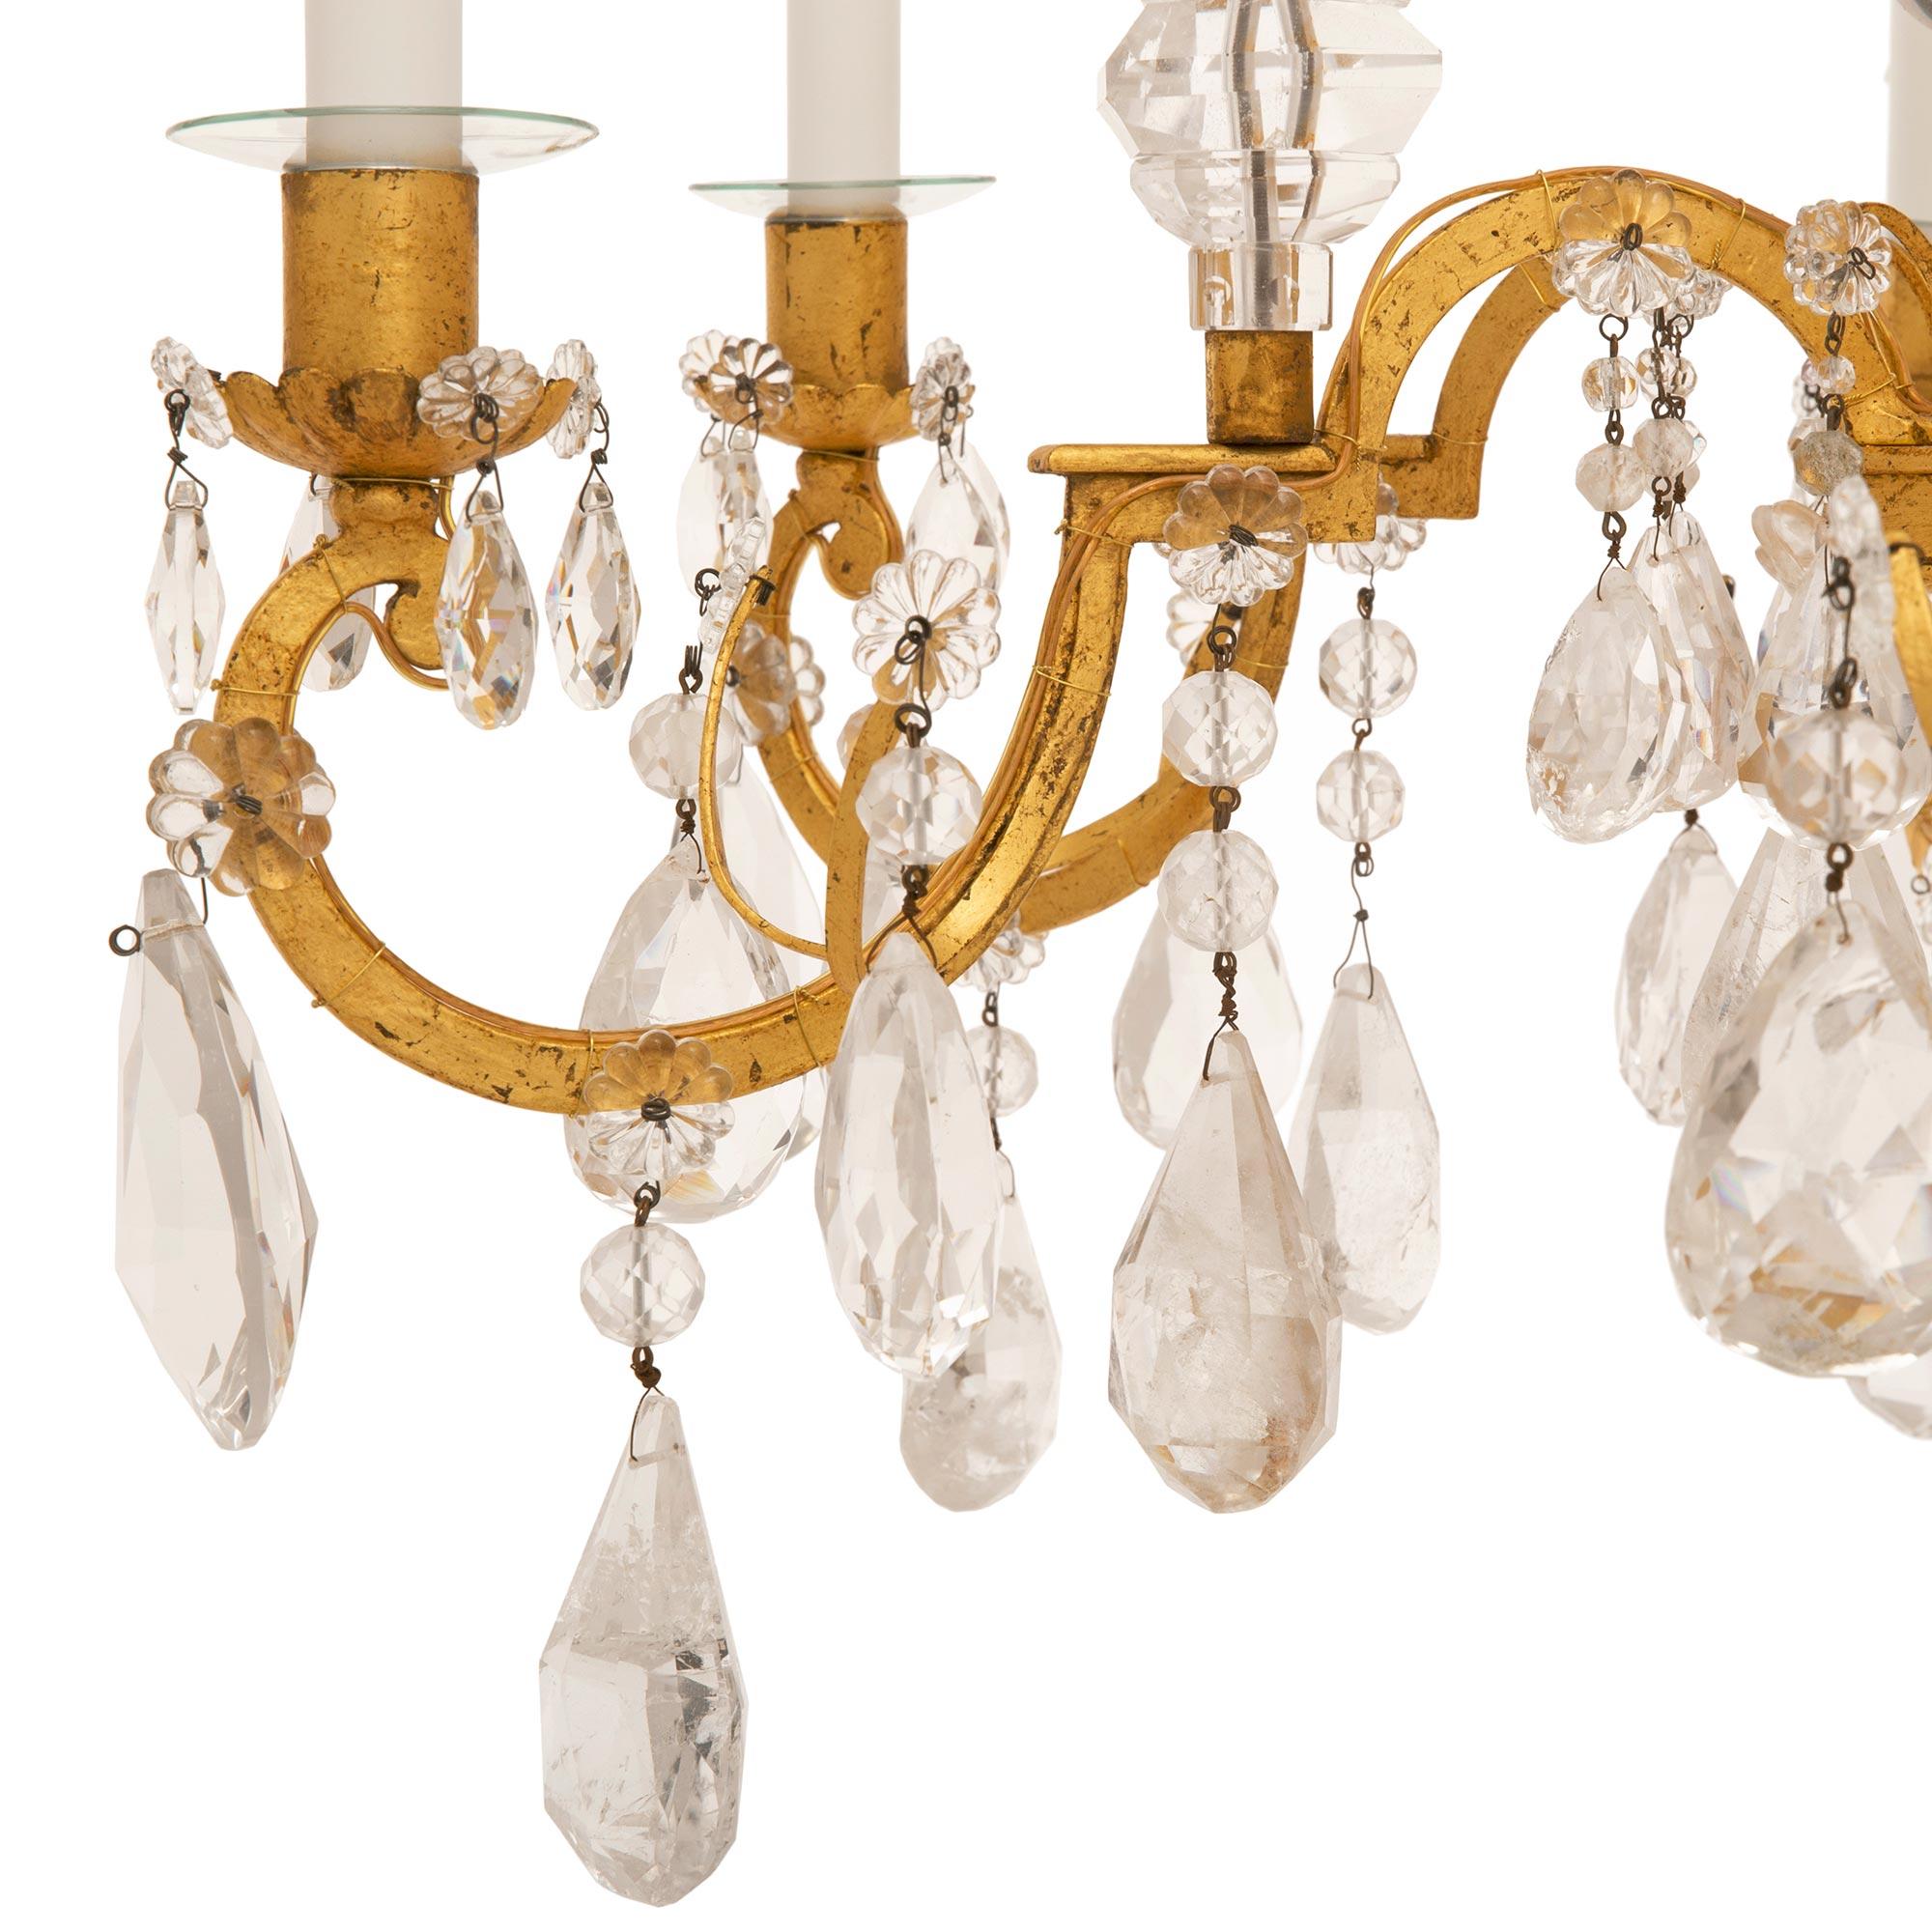 French 19th Century Louis XV St. Gilt Metal and Rock Crystal Chandelier For Sale 2